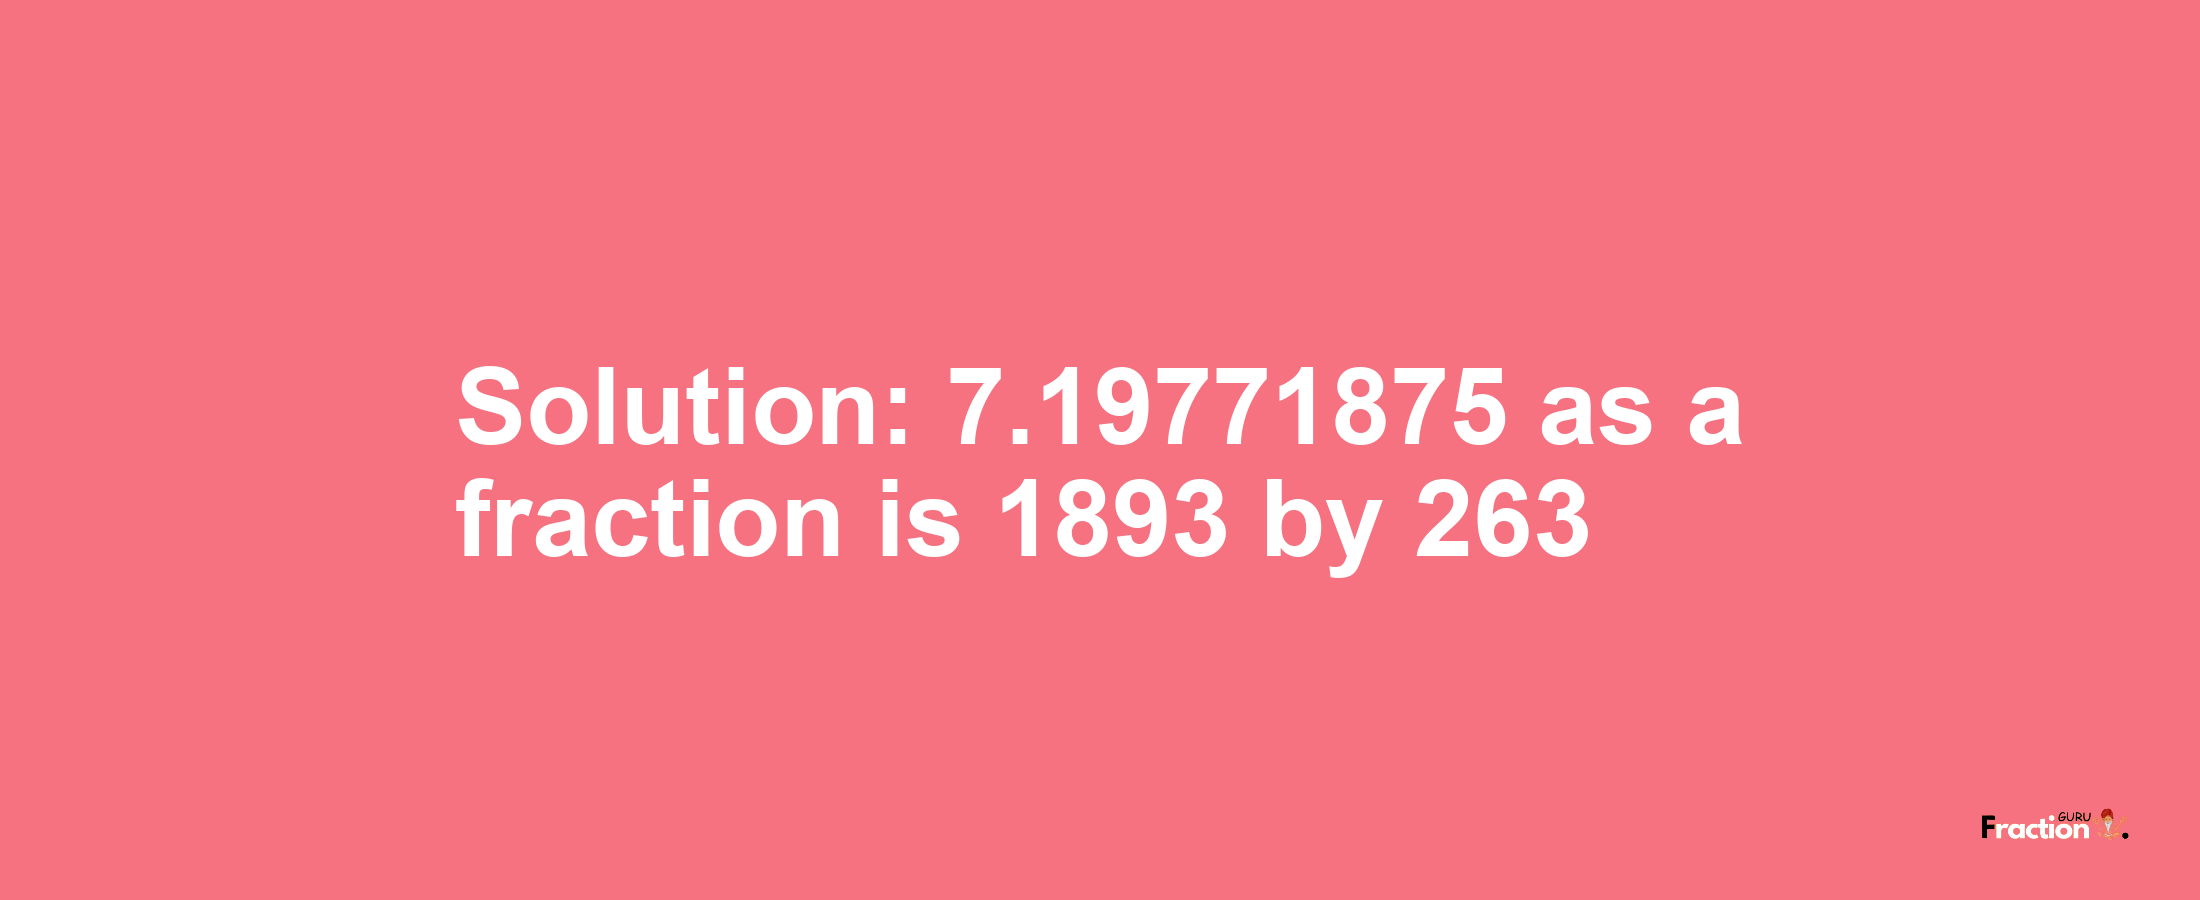 Solution:7.19771875 as a fraction is 1893/263